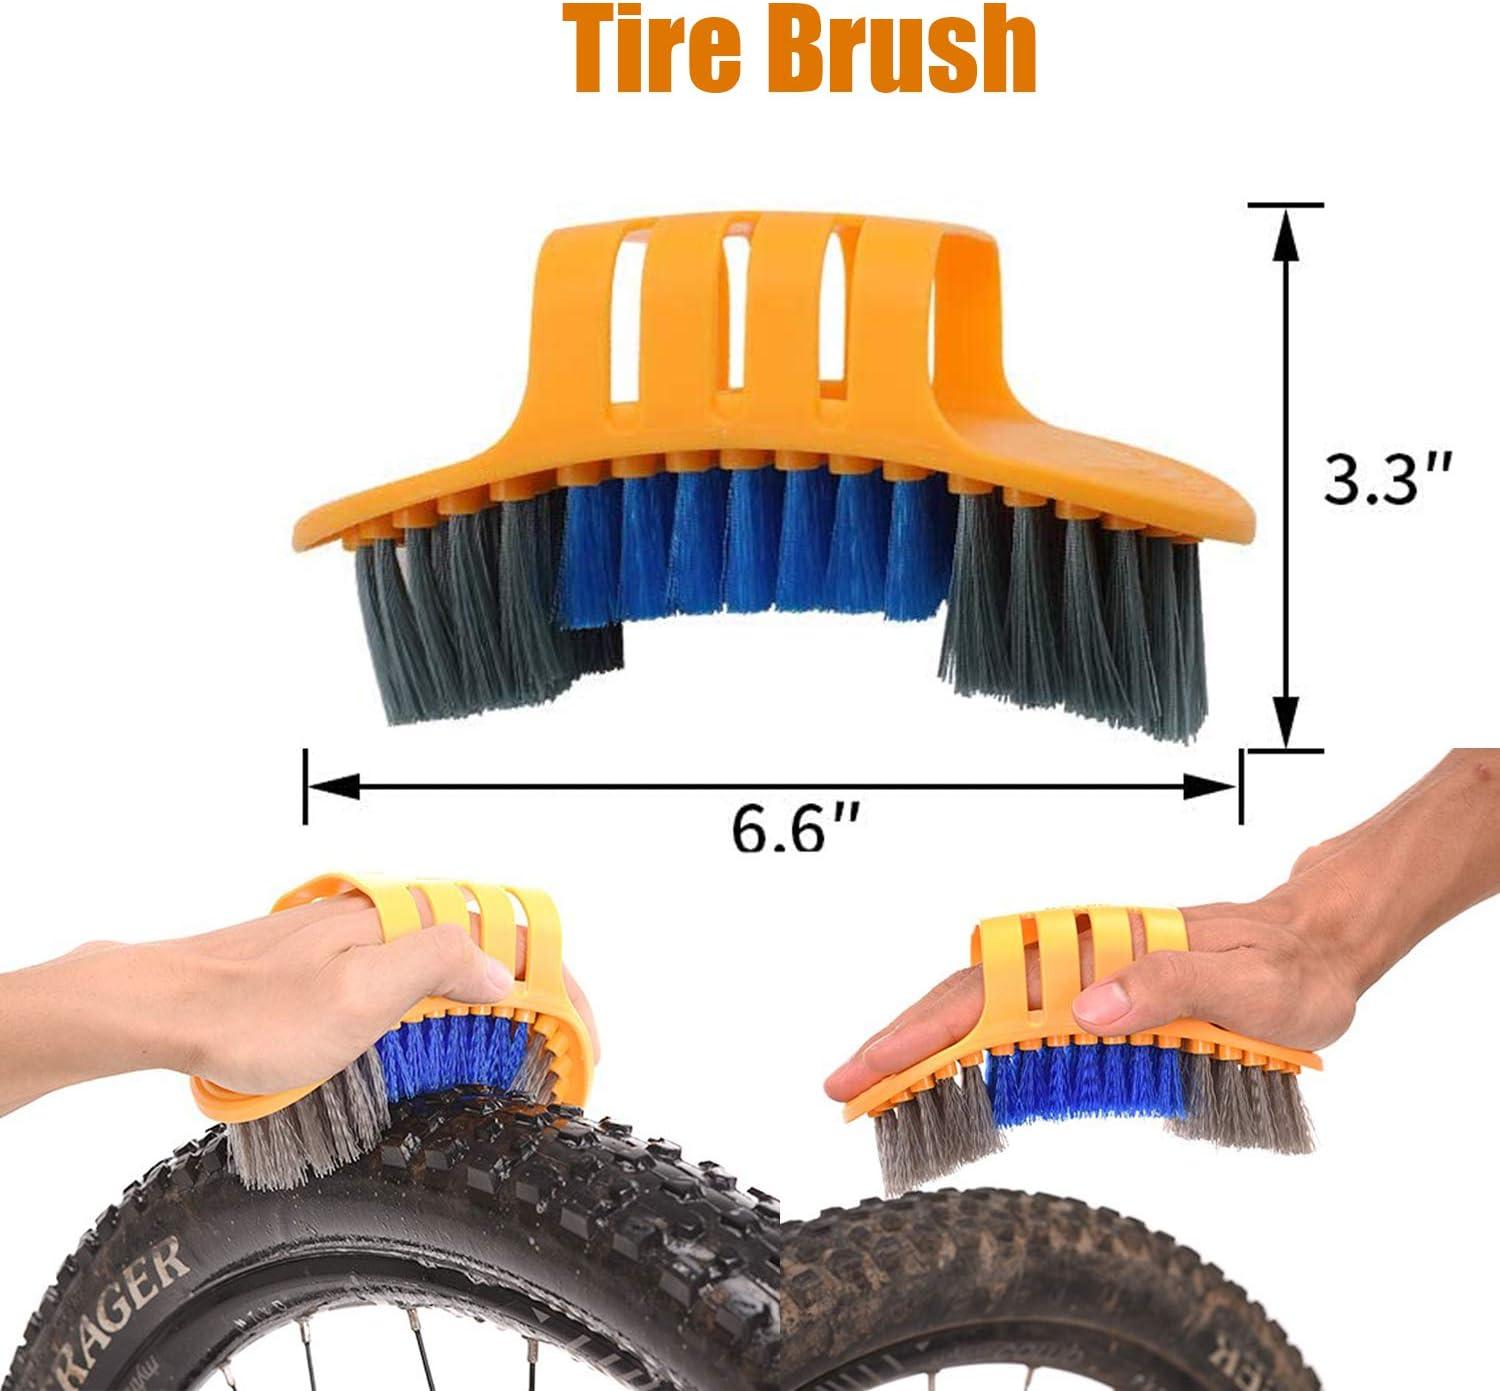 Long Reach Wheel Cleaning Brush Set for Car, Malaysia